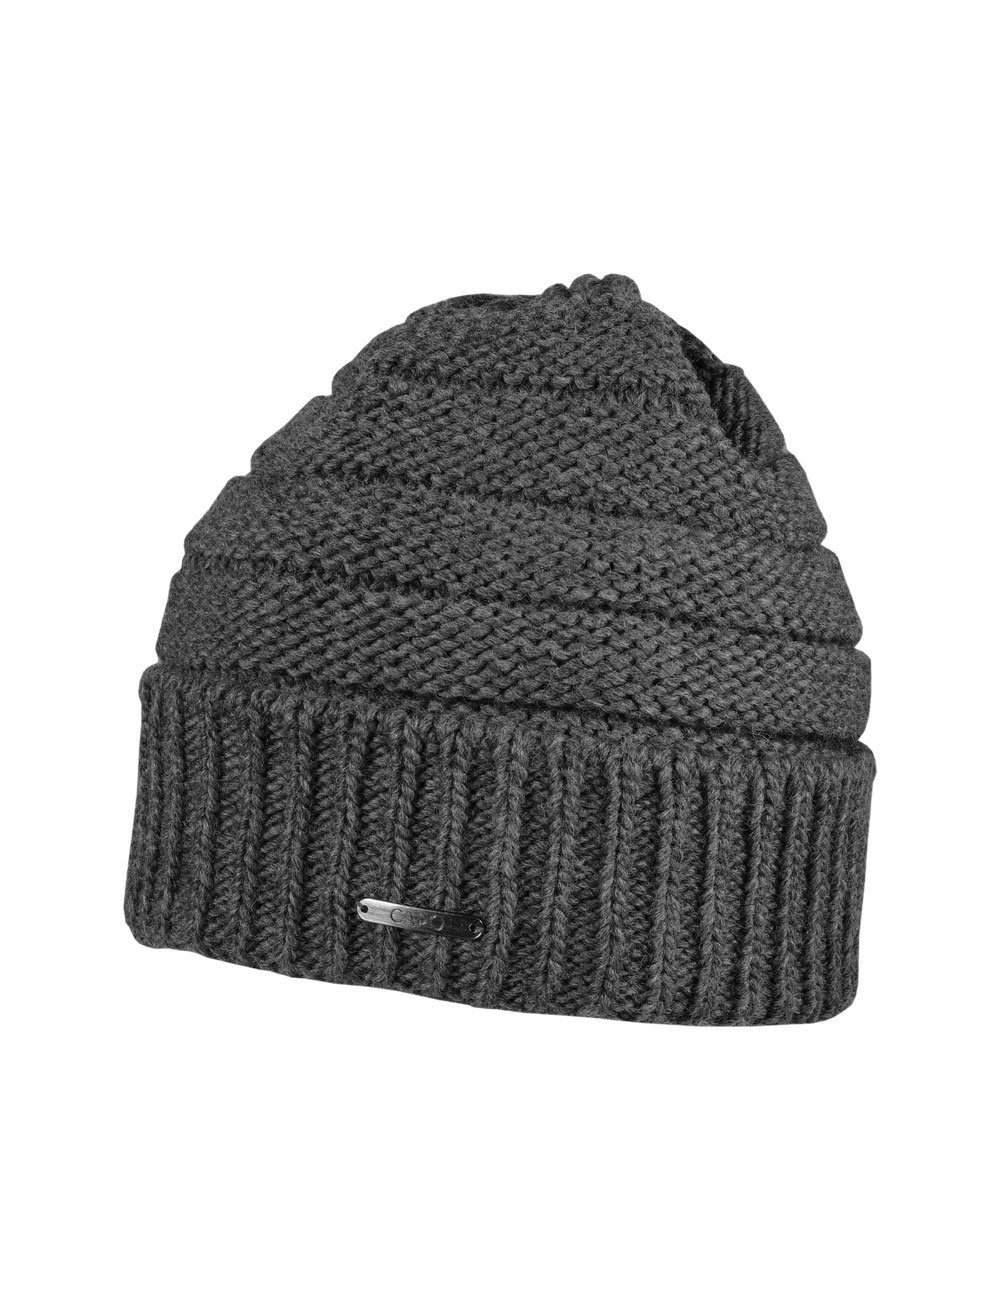 CAP in Made CAPO-PIPER turn up, Strickmütze fleece CAPO Germany cap, knitted short